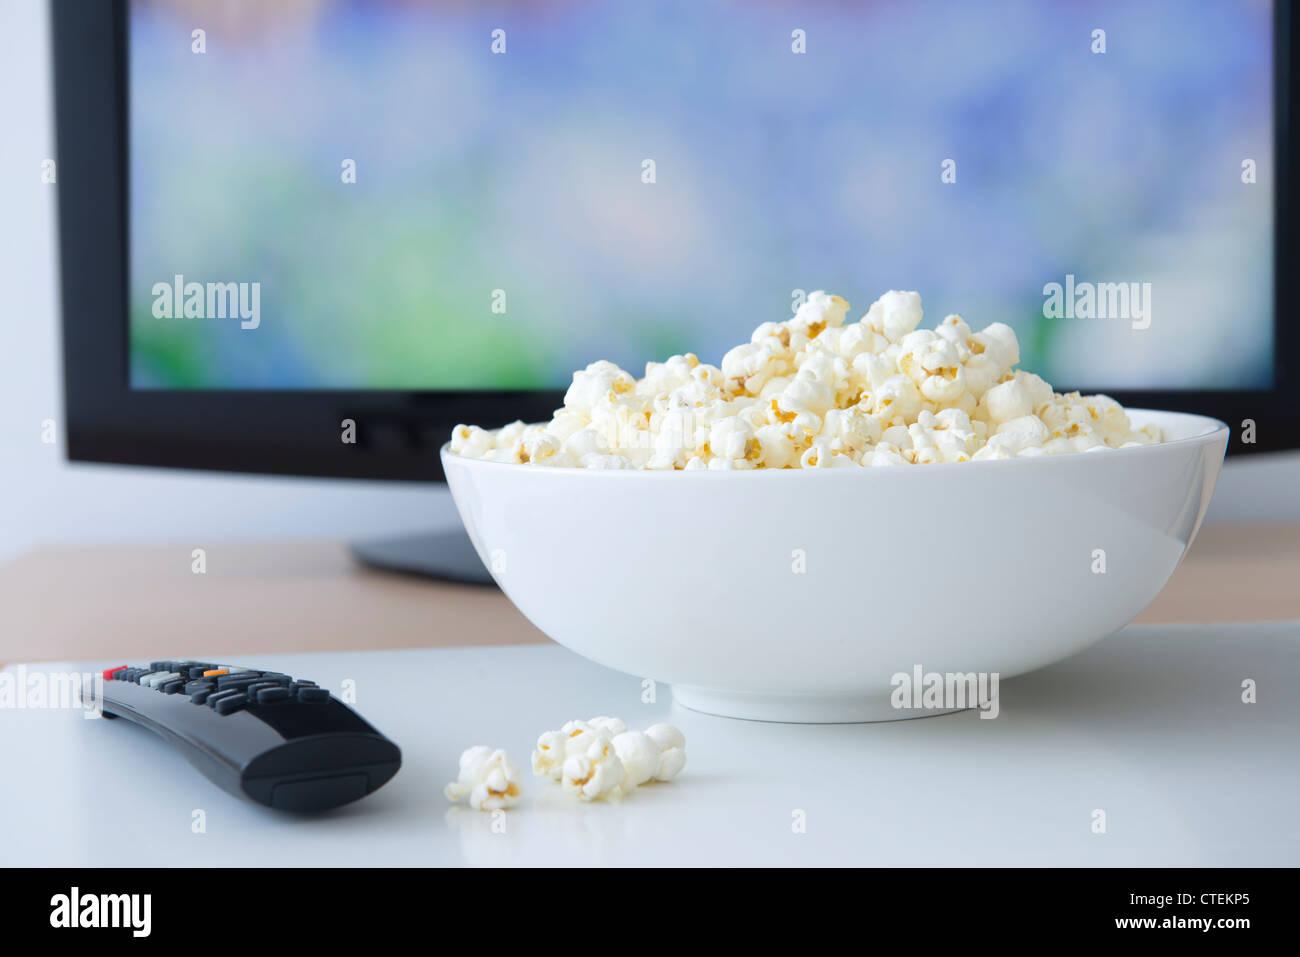 USA, New Jersey, Jersey City, Television set and bowl of popcorn Stock Photo